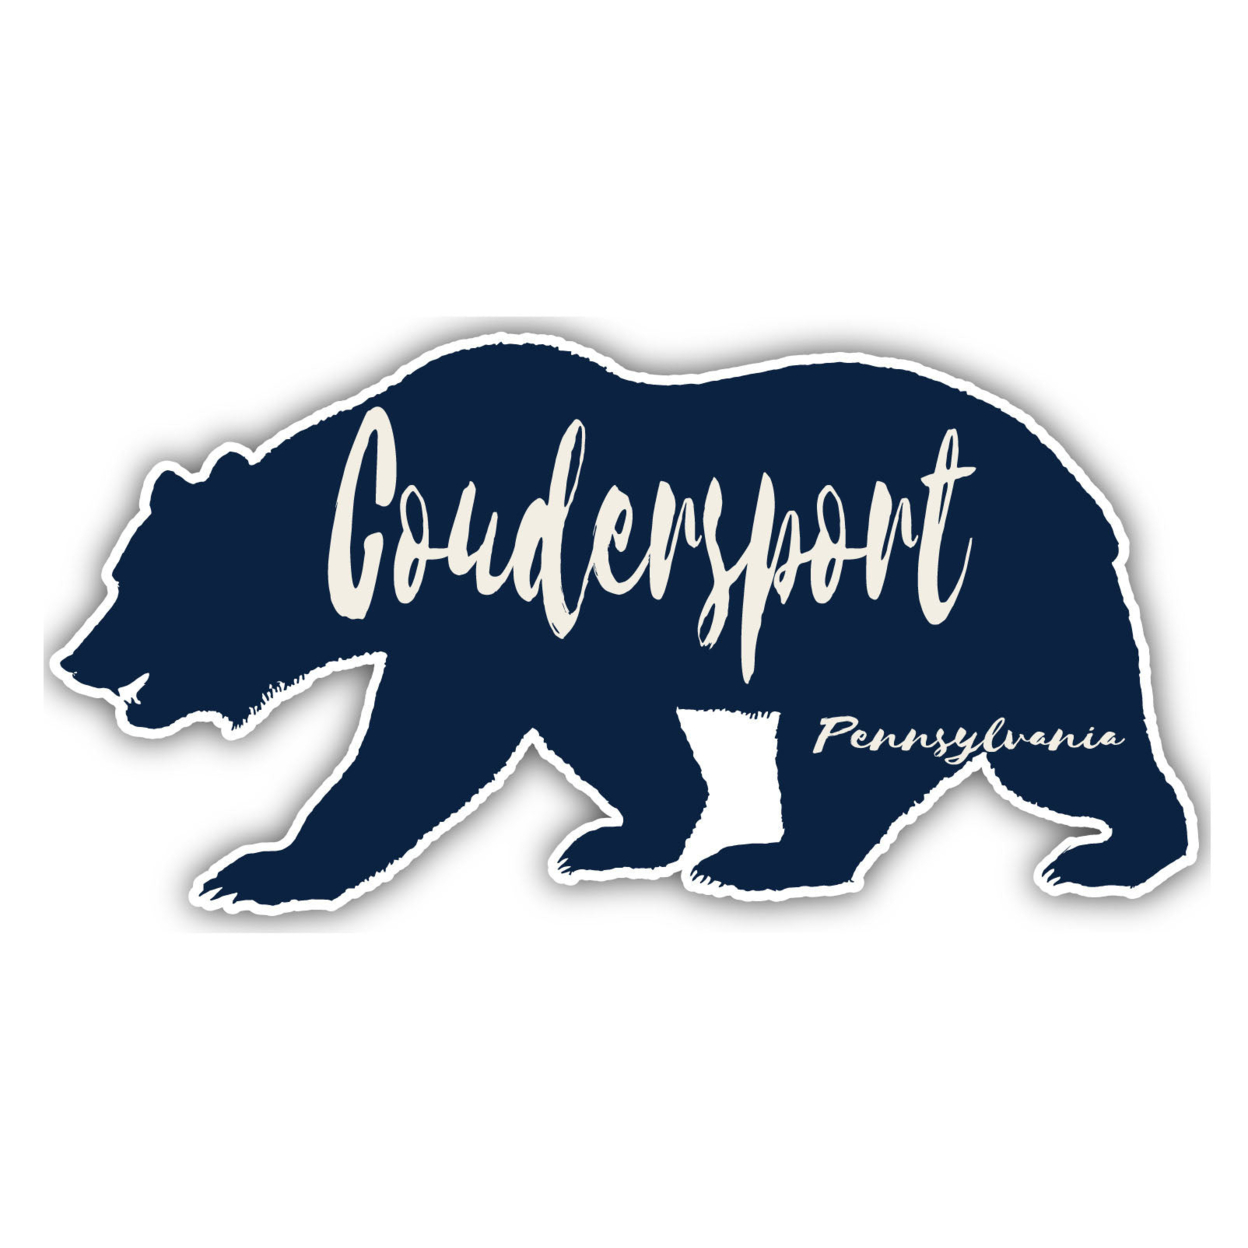 Coudersport Pennsylvania Souvenir Decorative Stickers (Choose Theme And Size) - 4-Pack, 10-Inch, Bear